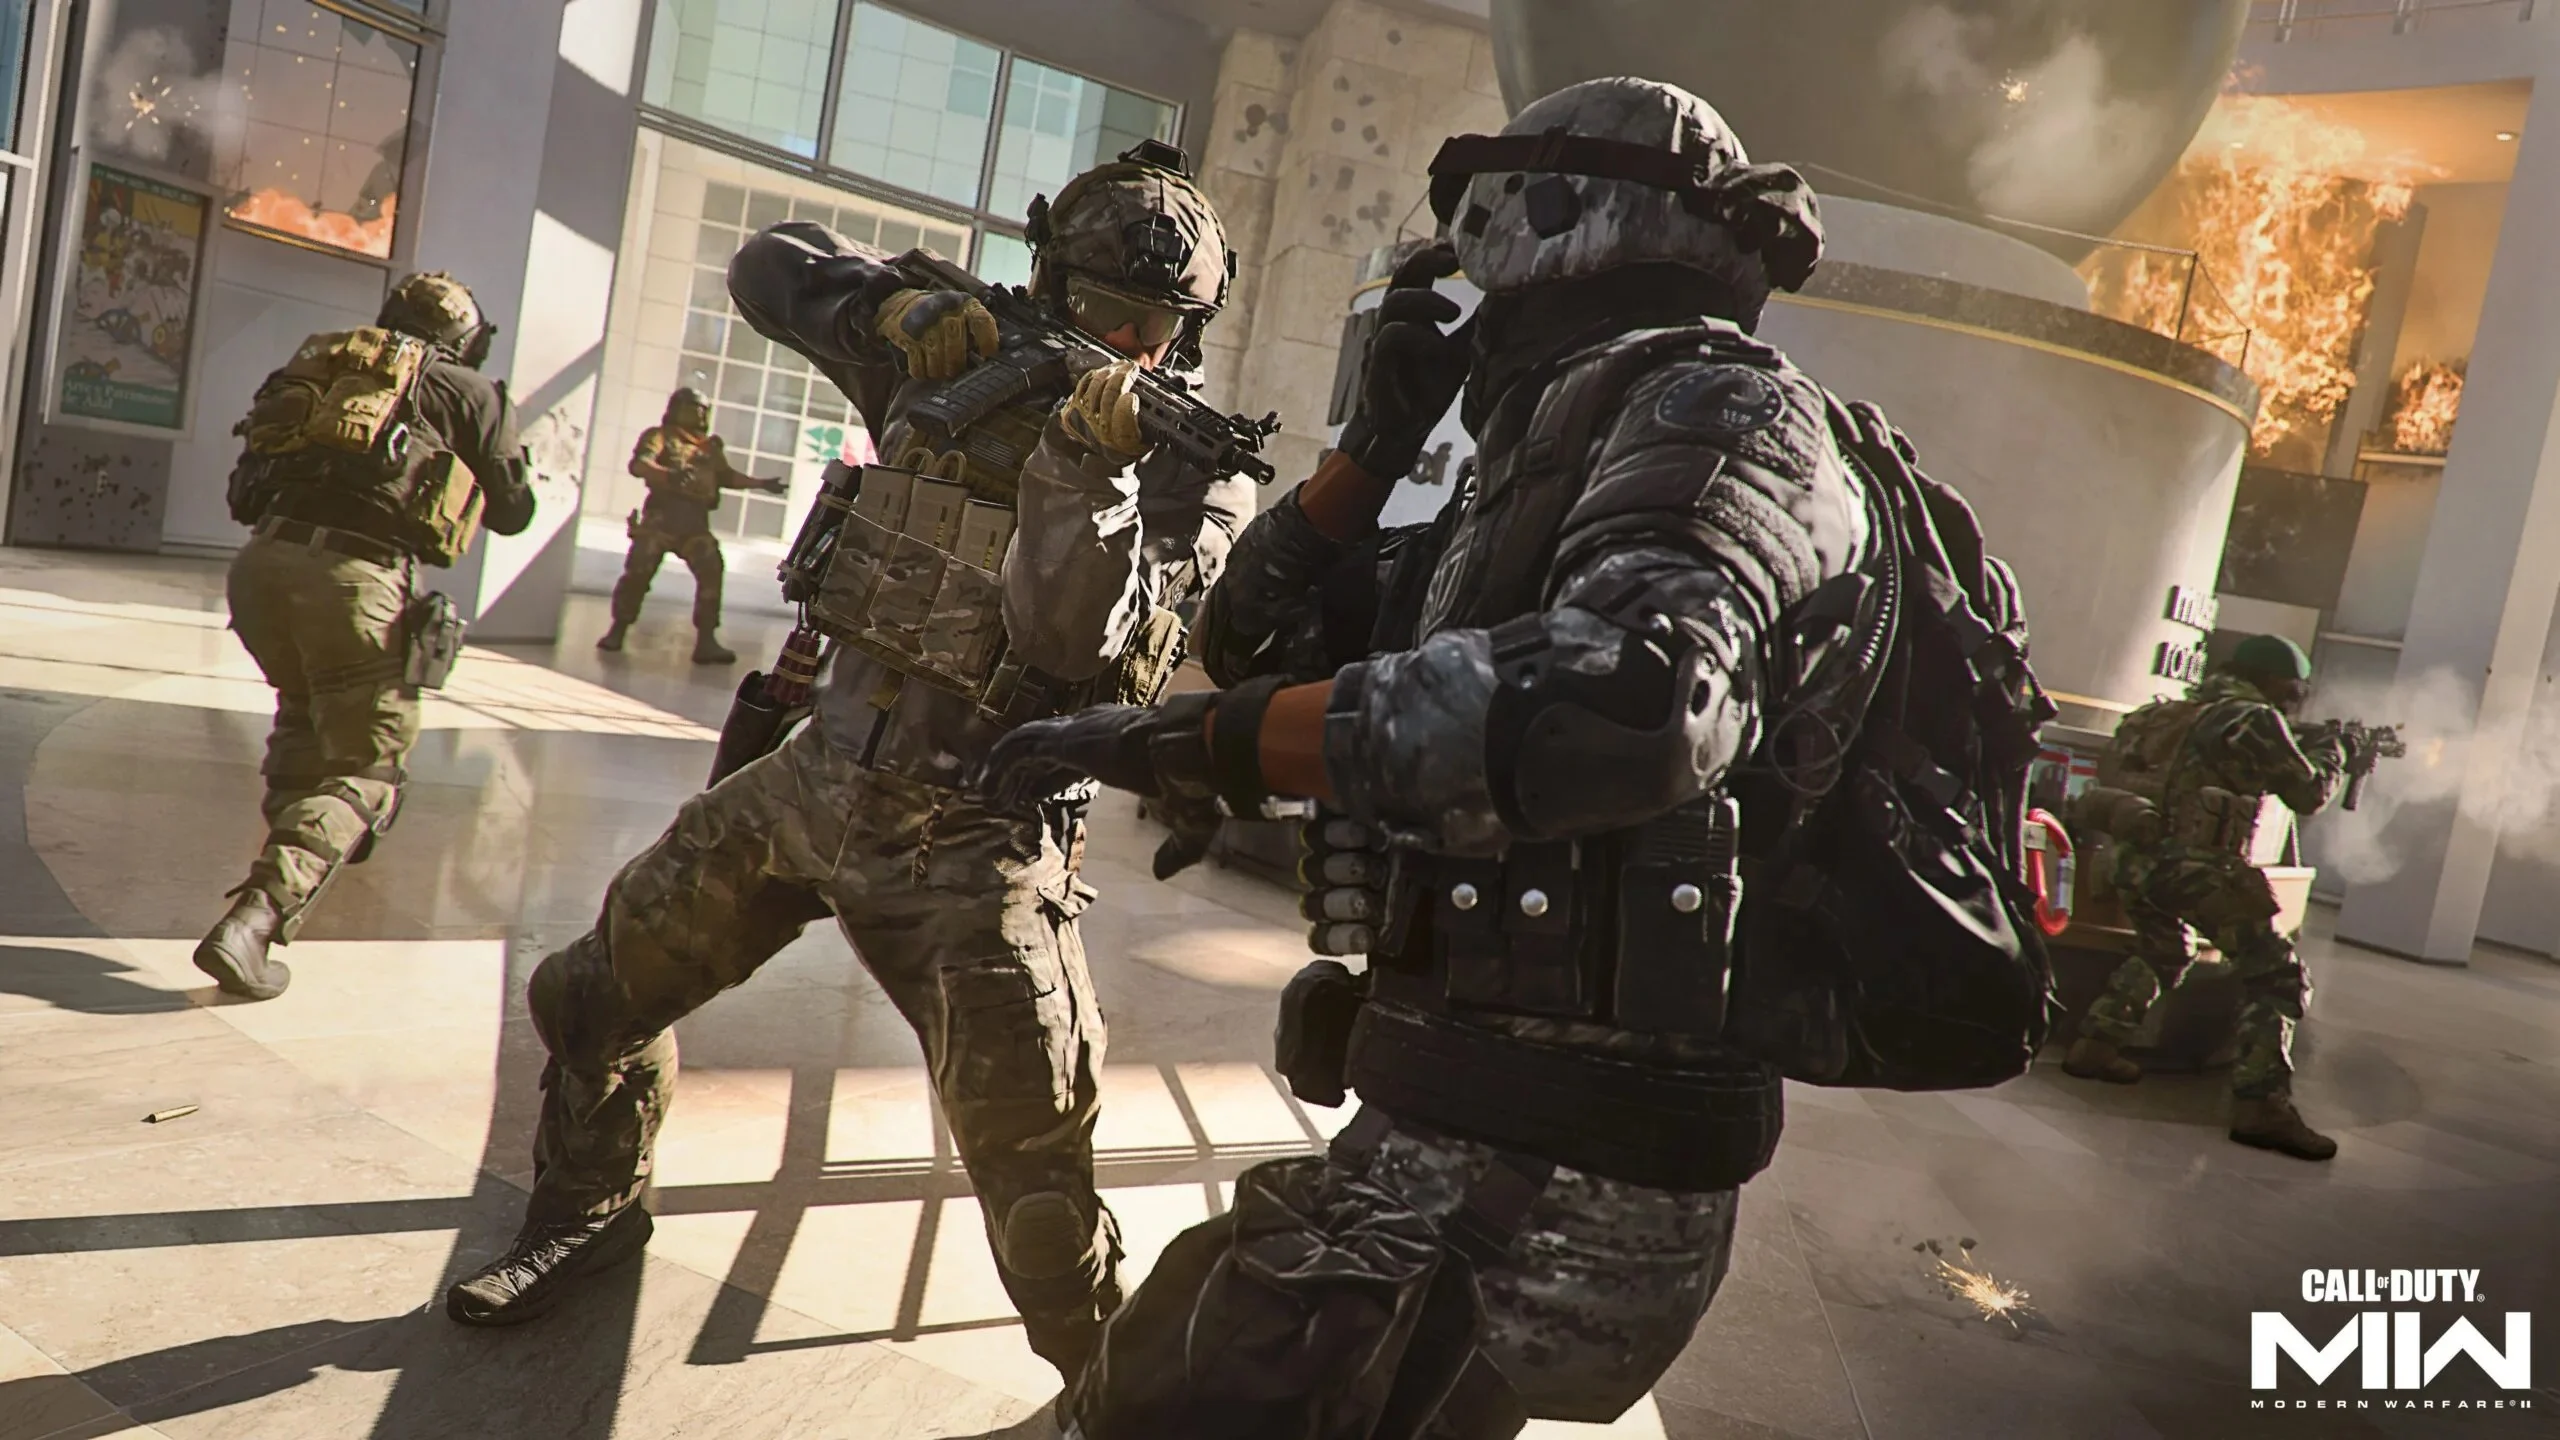 call of duty: modern warfare will require 2 phone numbers